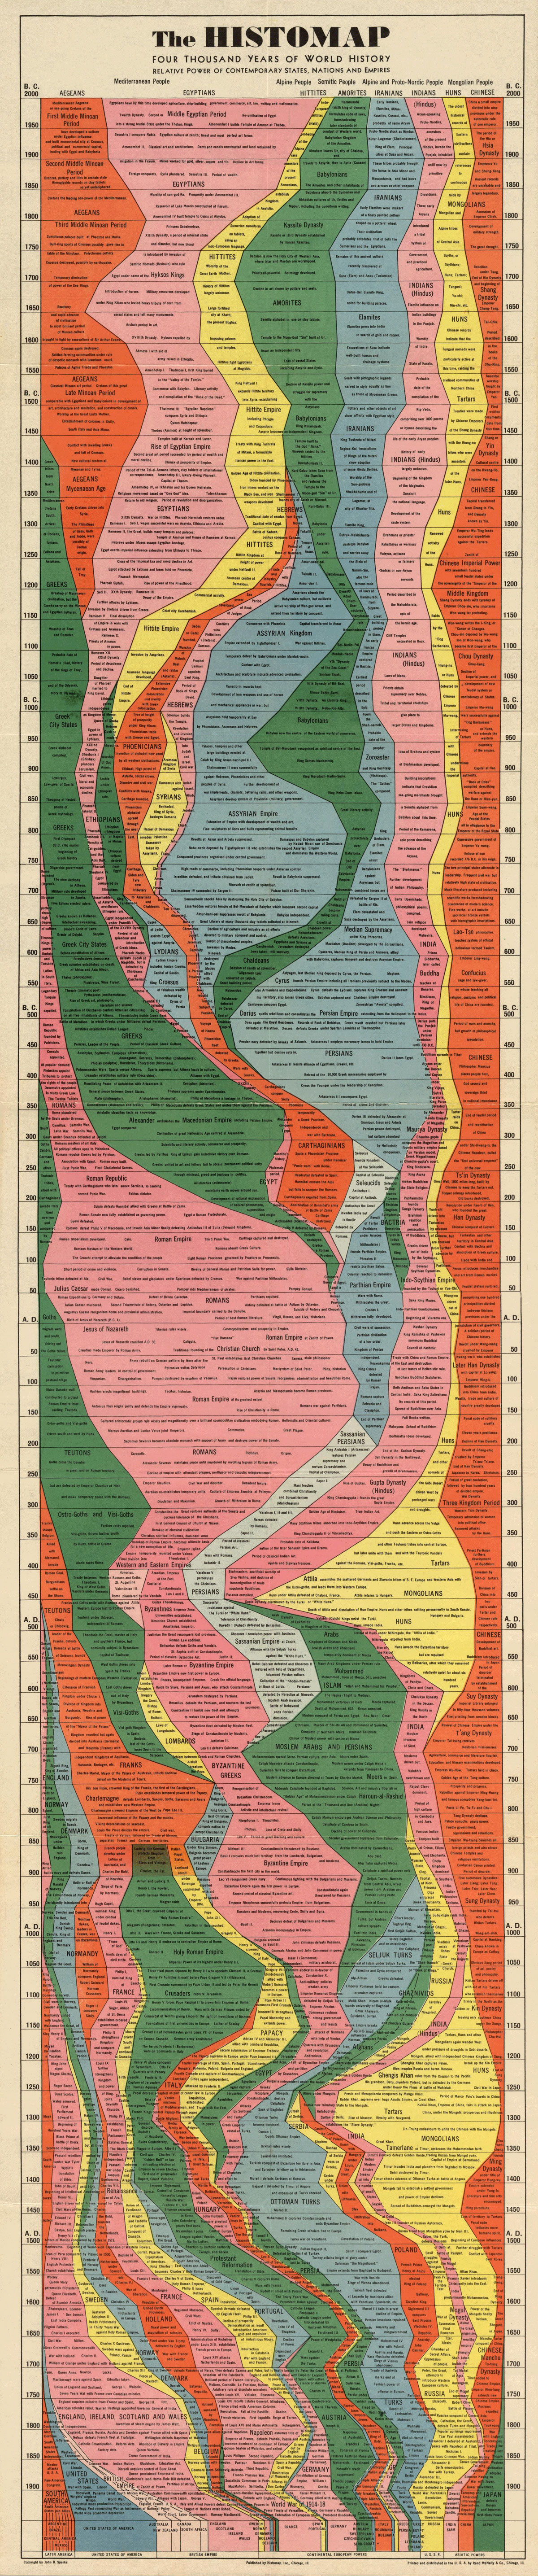 4000 years of world history in one epic chart1 4,000 Years of World History in One Epic Chart